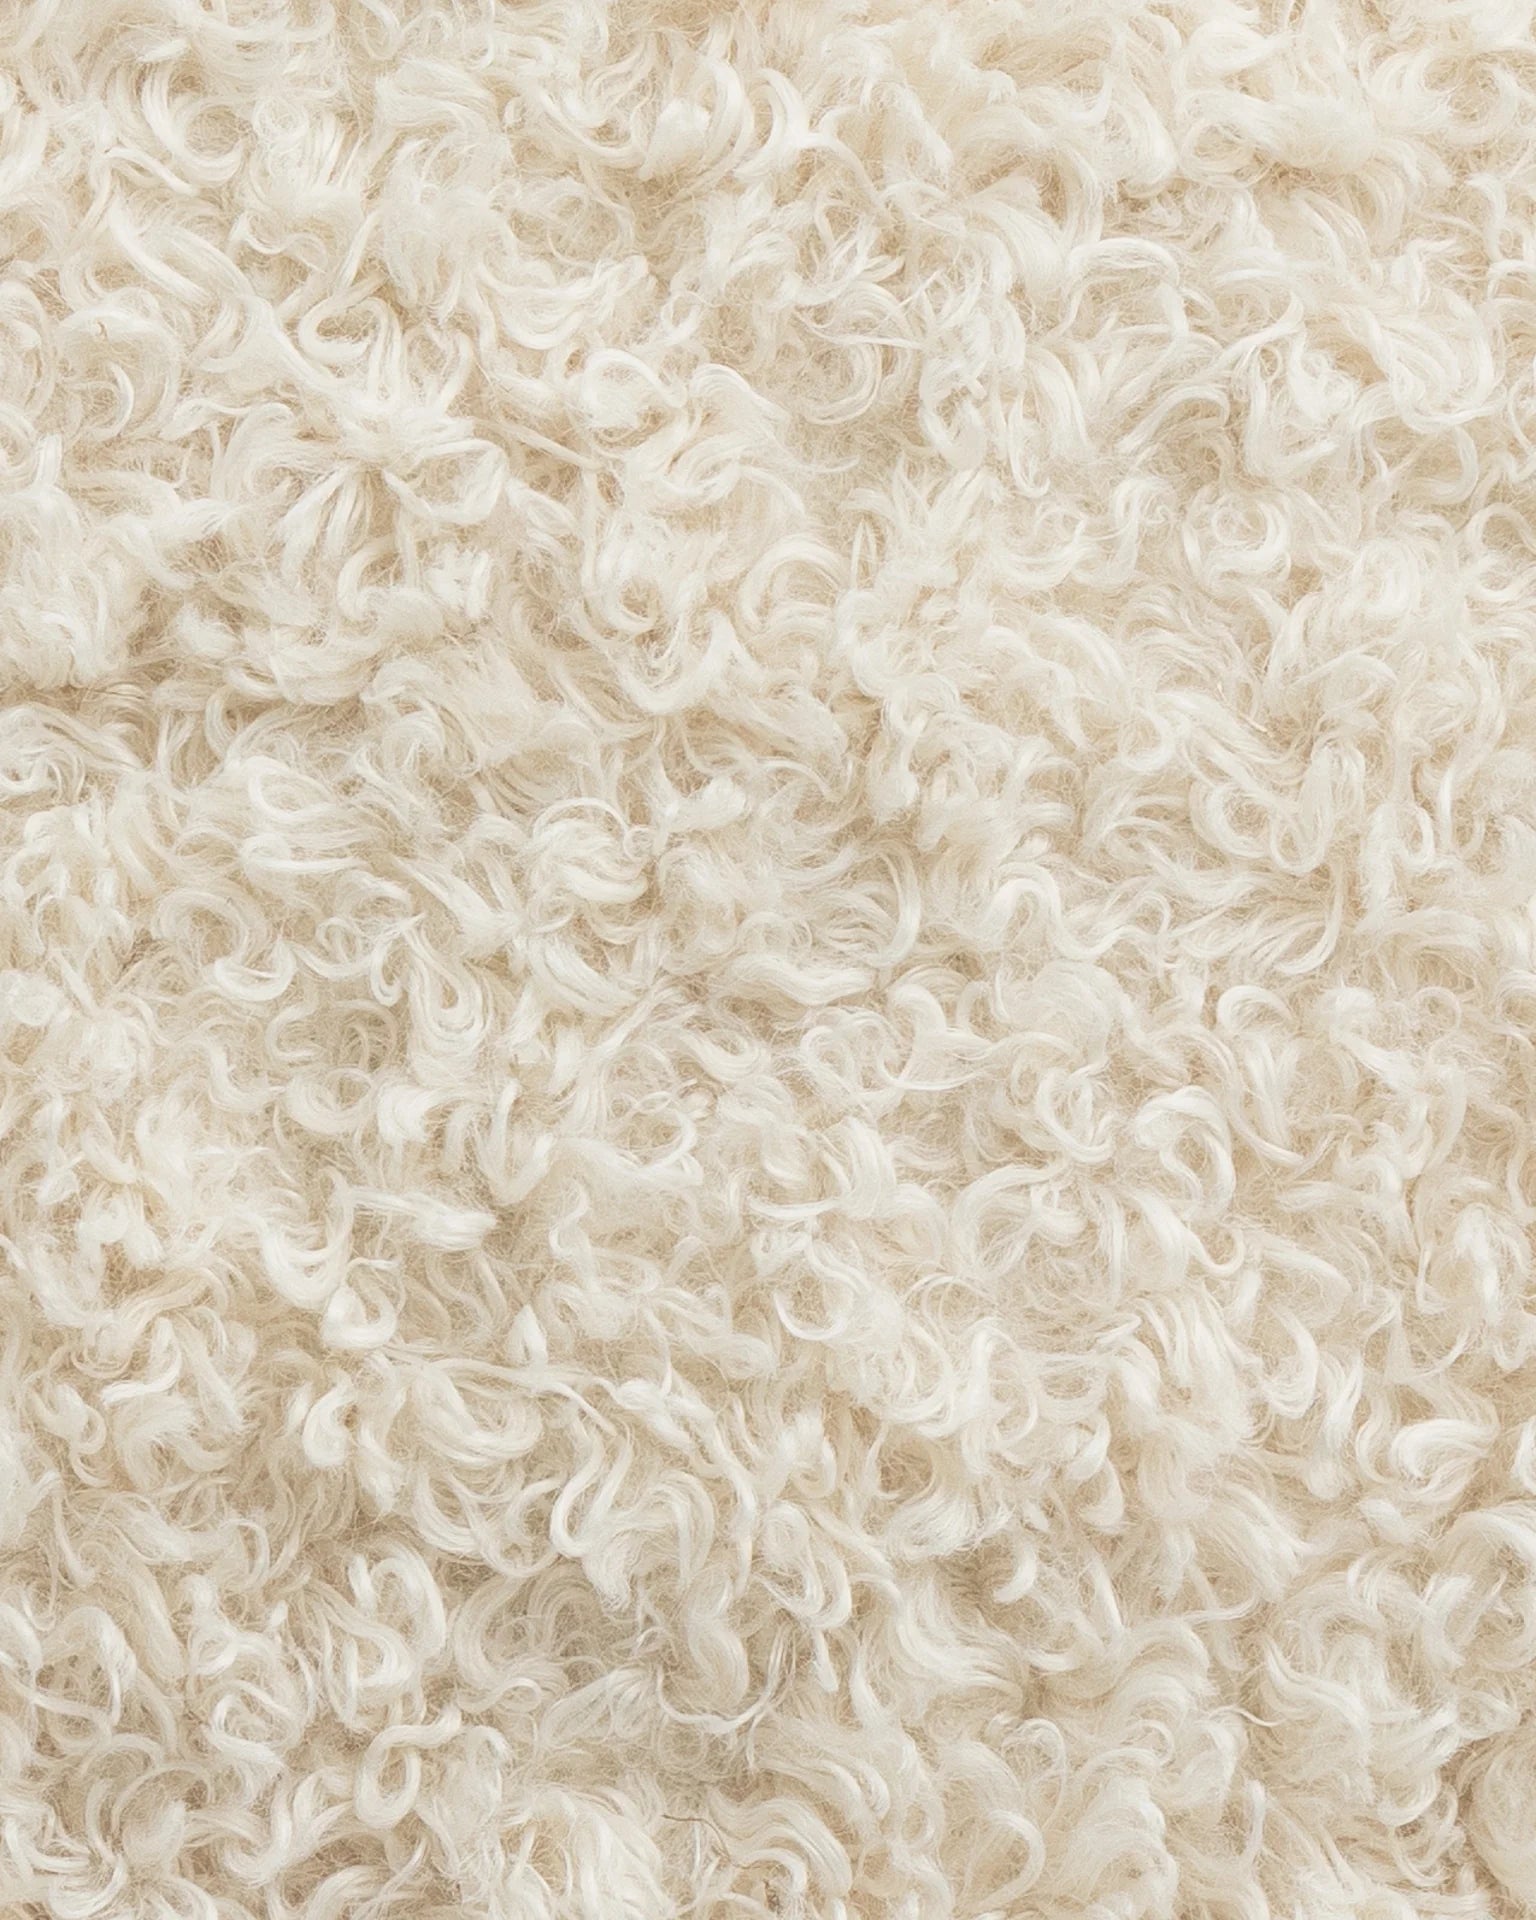 Close-up view of a textured, curly sheepskin rug in a light cream color, showing intricate curly wool fibers in a Gabby bungalow.